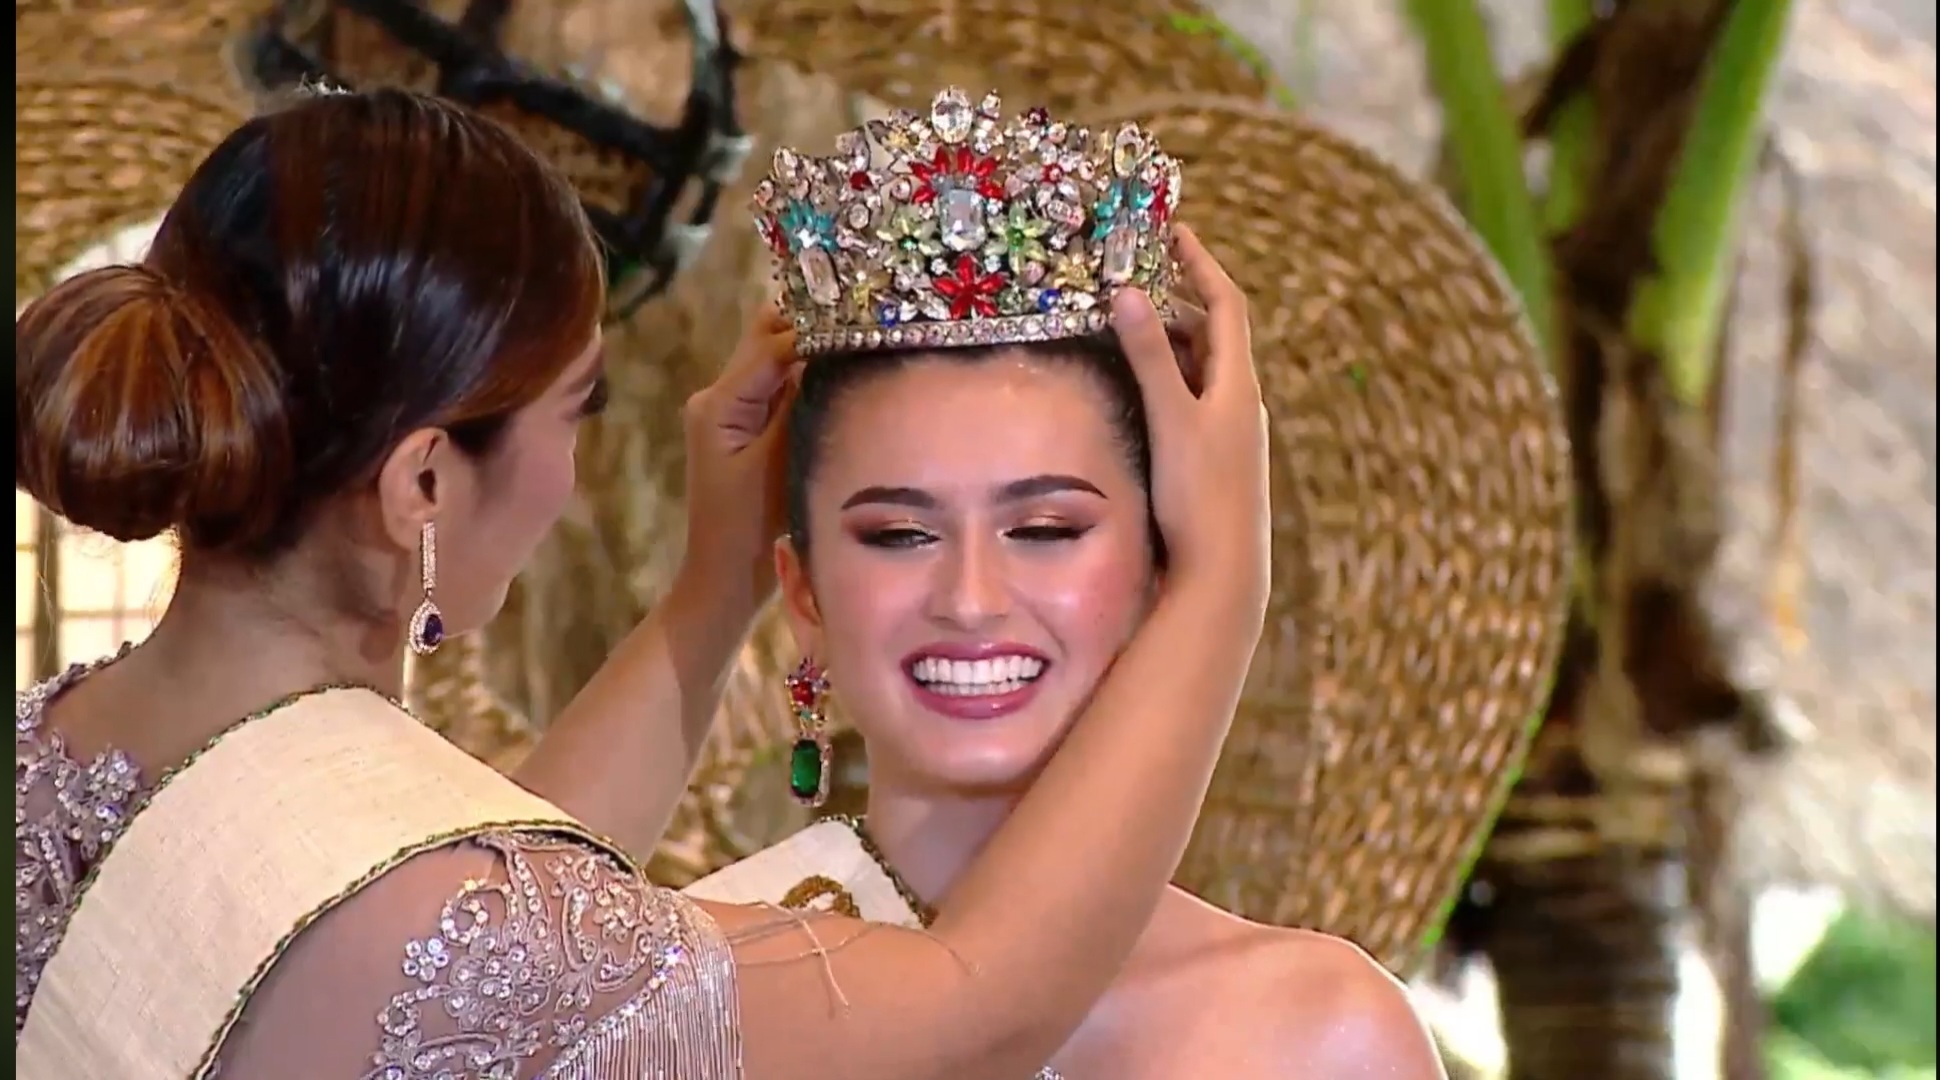 Jenny Ramp receives her Miss Philippines Earth crown from Naelah Alshorbaji./MISS PHILIPPINES EARTH FACEBOOK LIVE SCREENSHOT